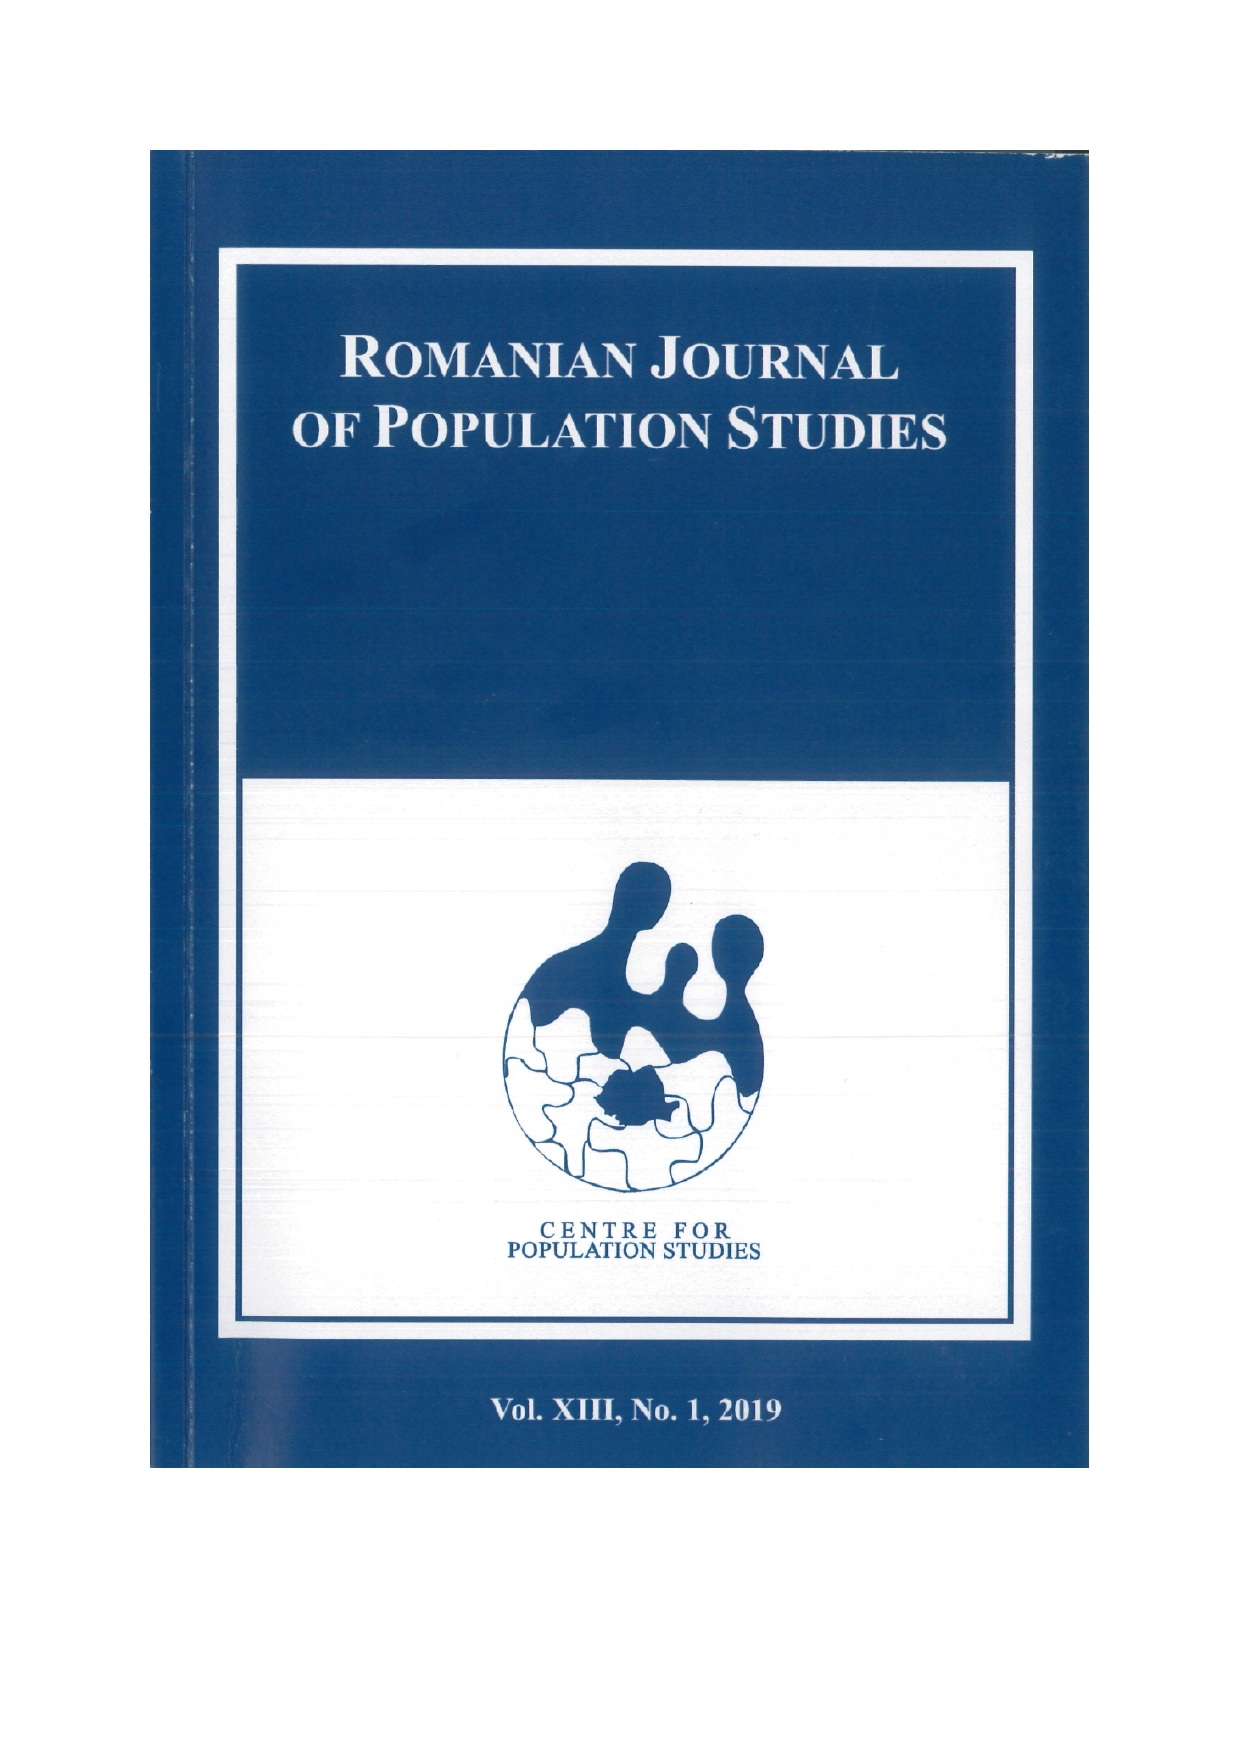 Education as a Vehicle for Social Mobility in the 19th Century in Transylvania. A Comparative View on Romanians and Hungarians in the Gurghiu Valley